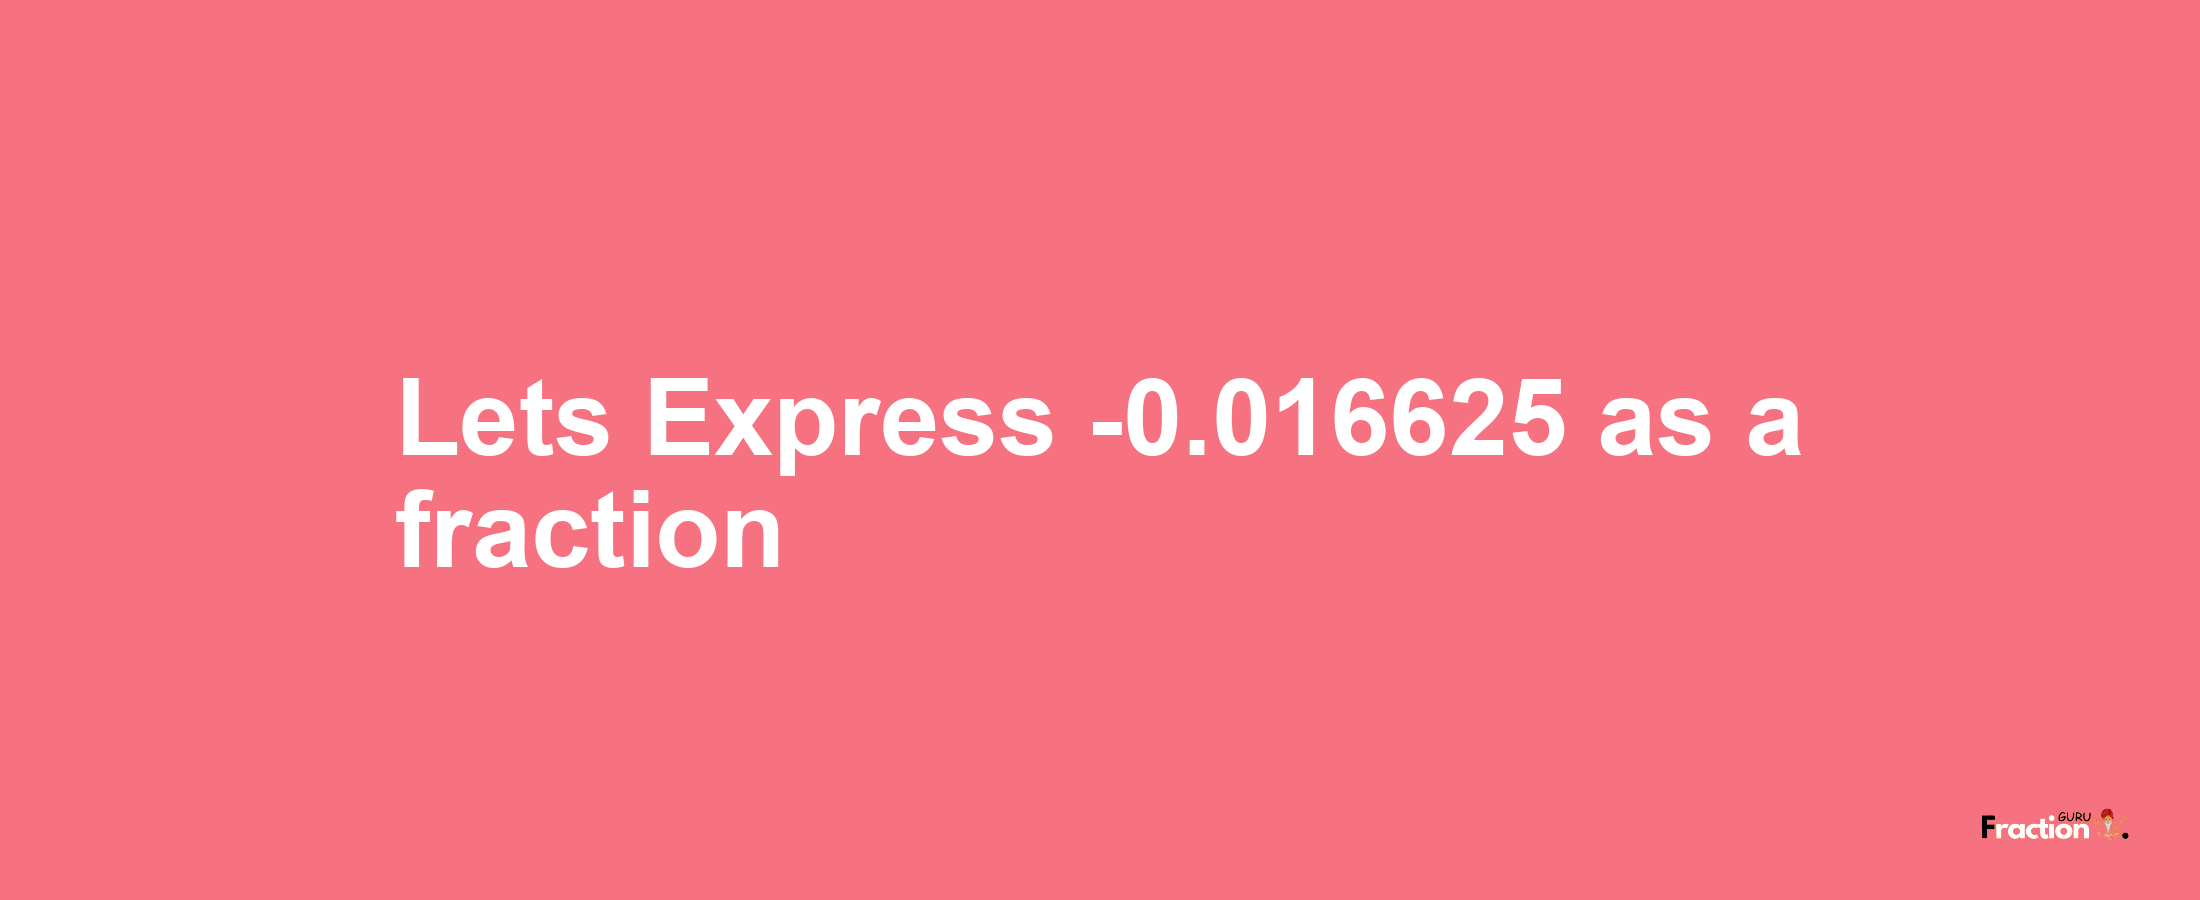 Lets Express -0.016625 as afraction